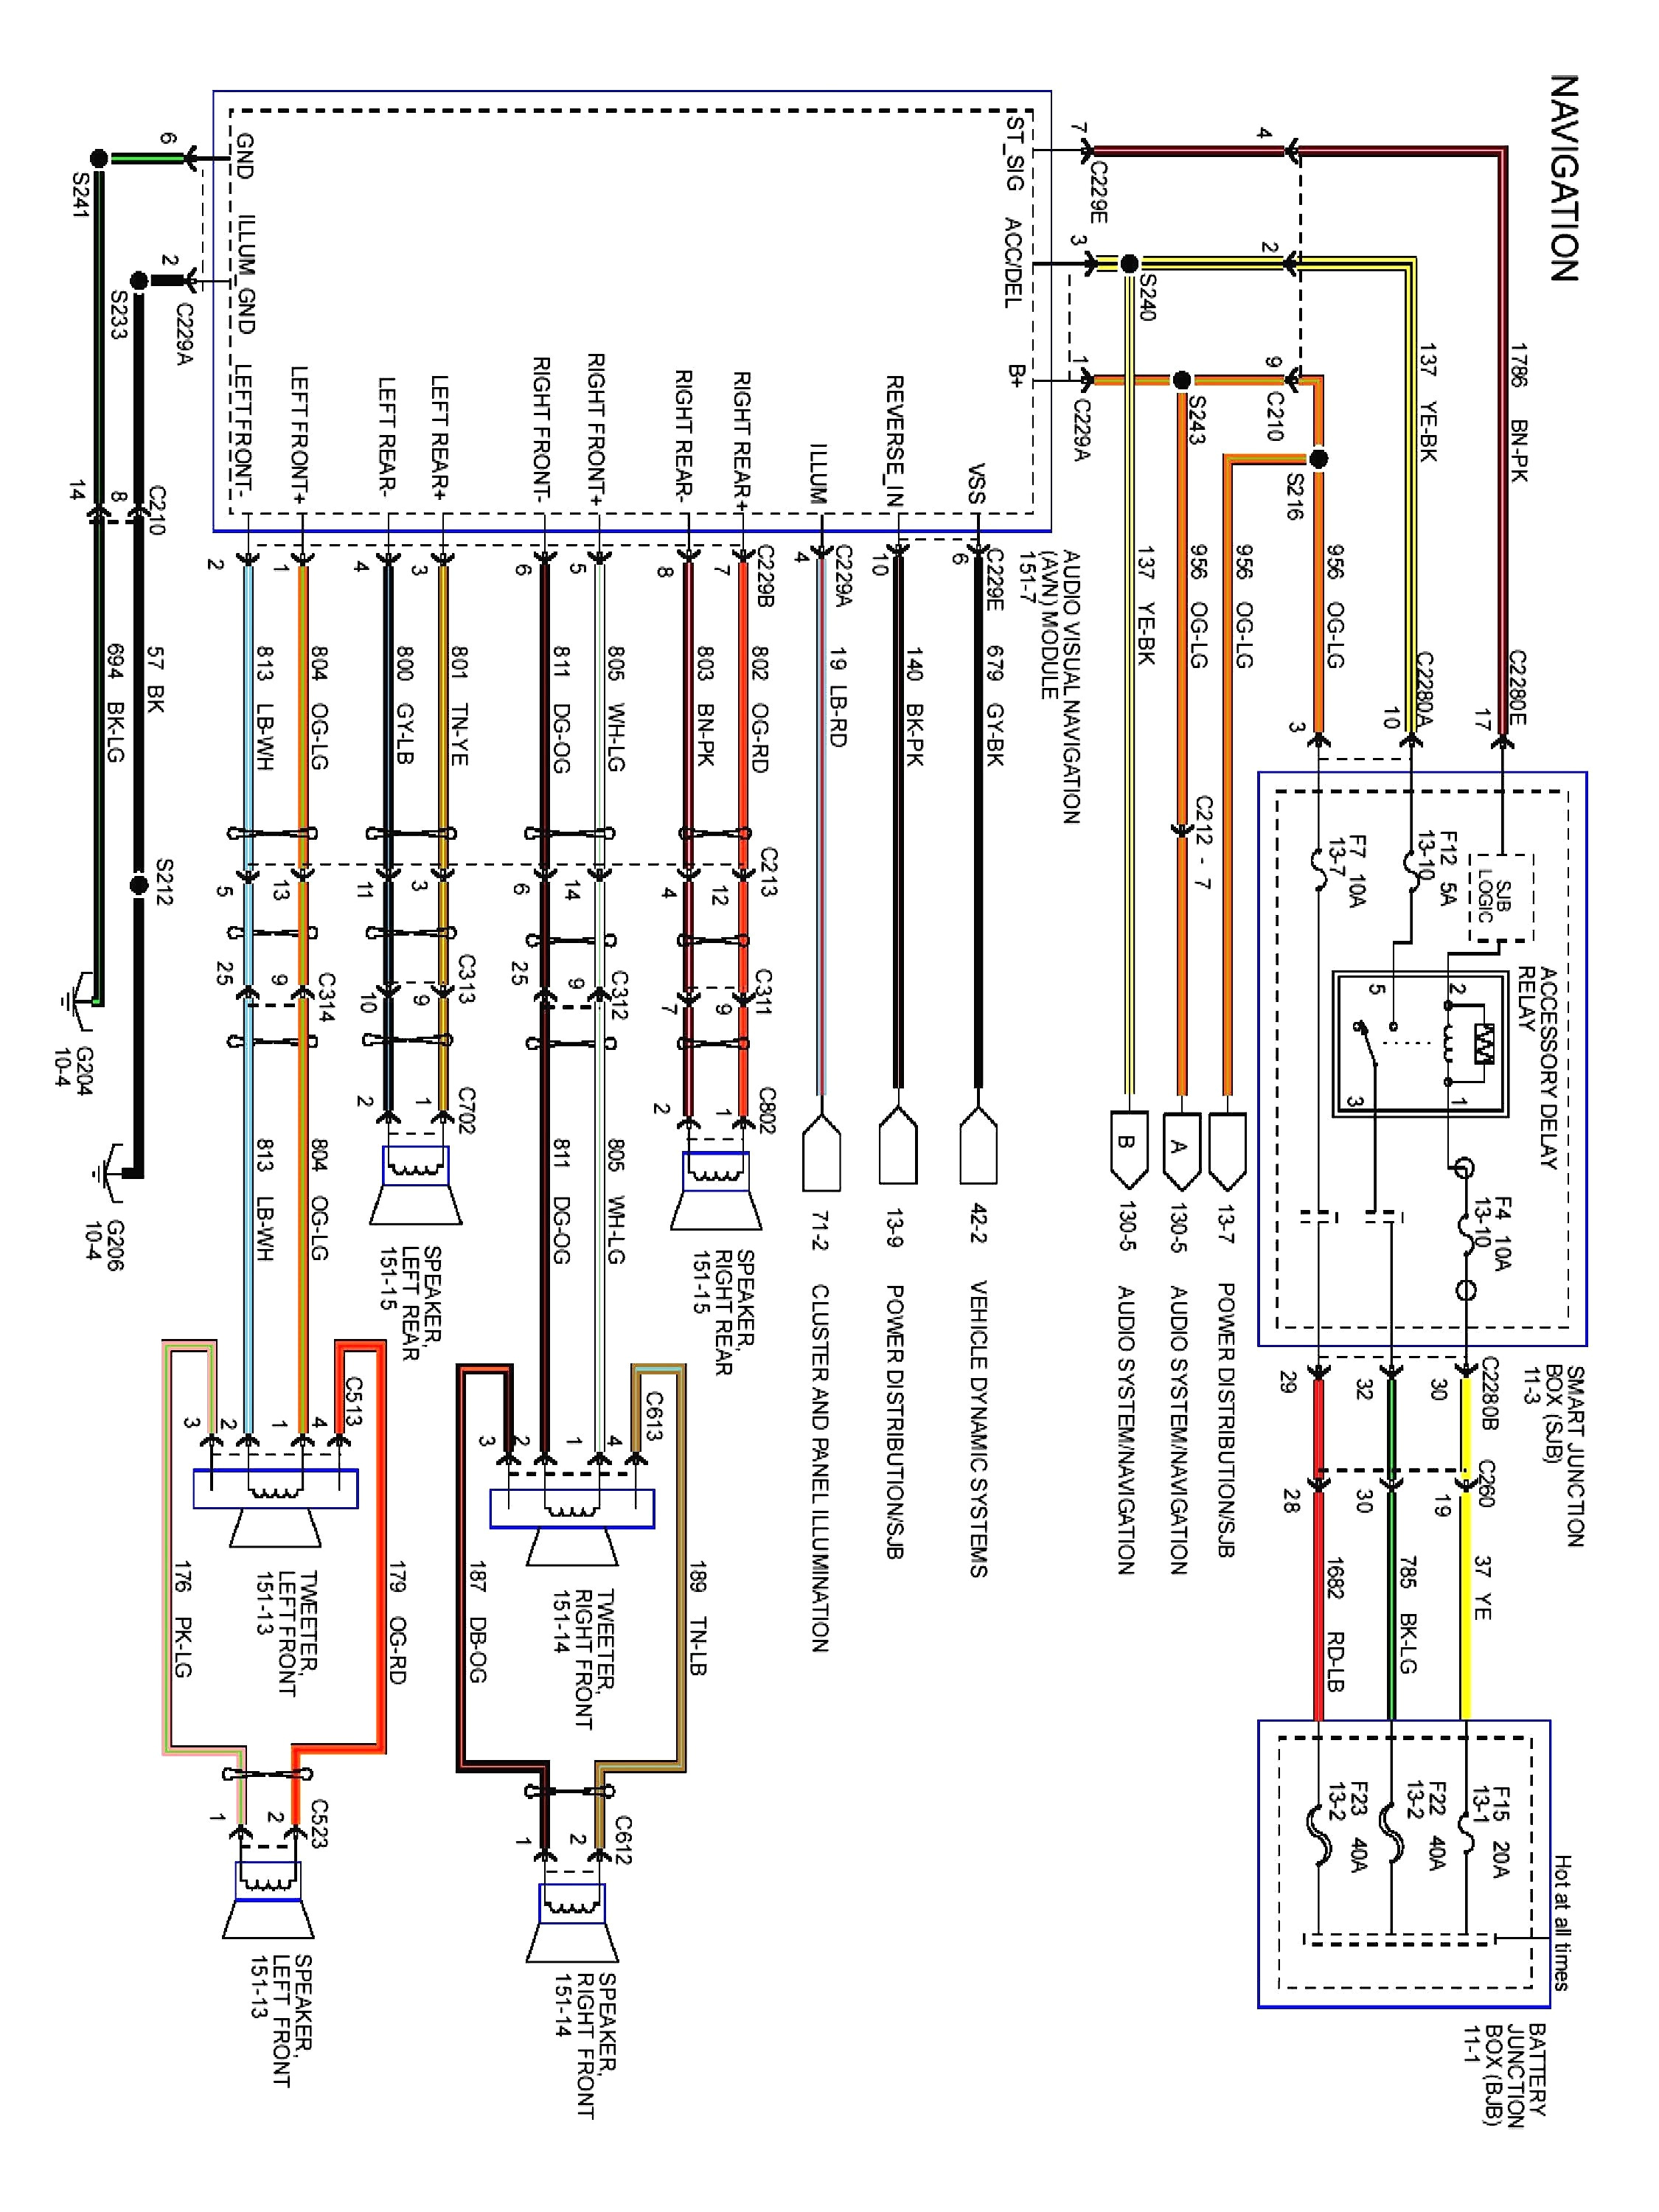 2011 ford wiring diagram wiring diagram view ford fiesta wiring diagram pdf ford f 150 wiring